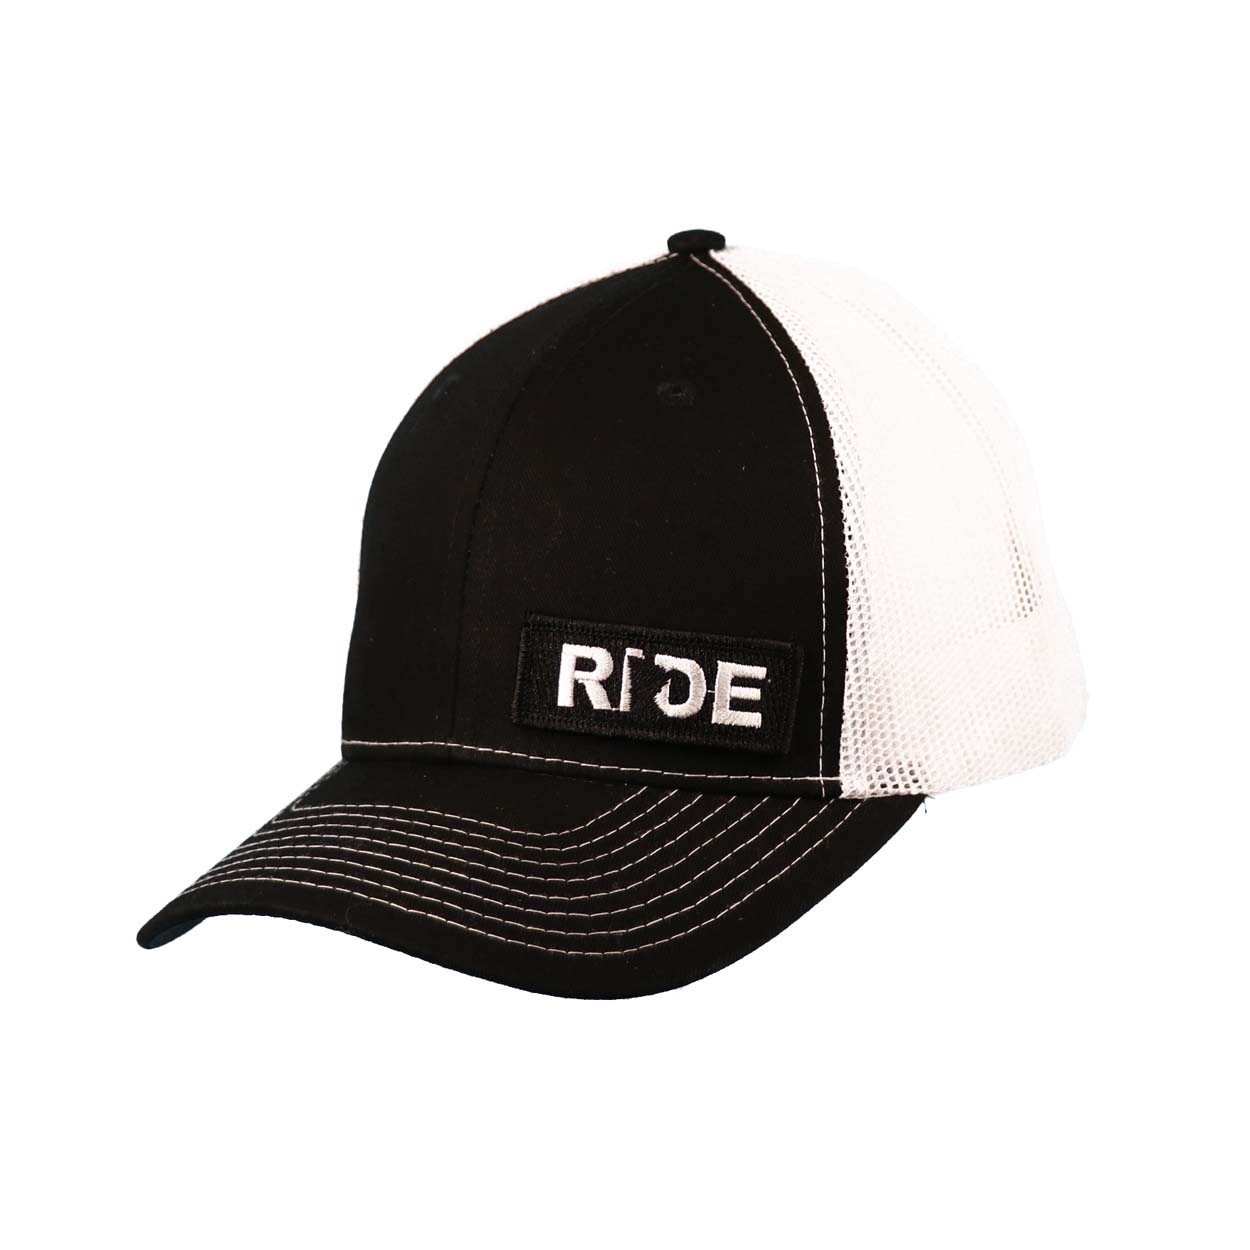 Ride Minnesota Night Out Embroidered Patch Snapback Trucker Hat Black/White